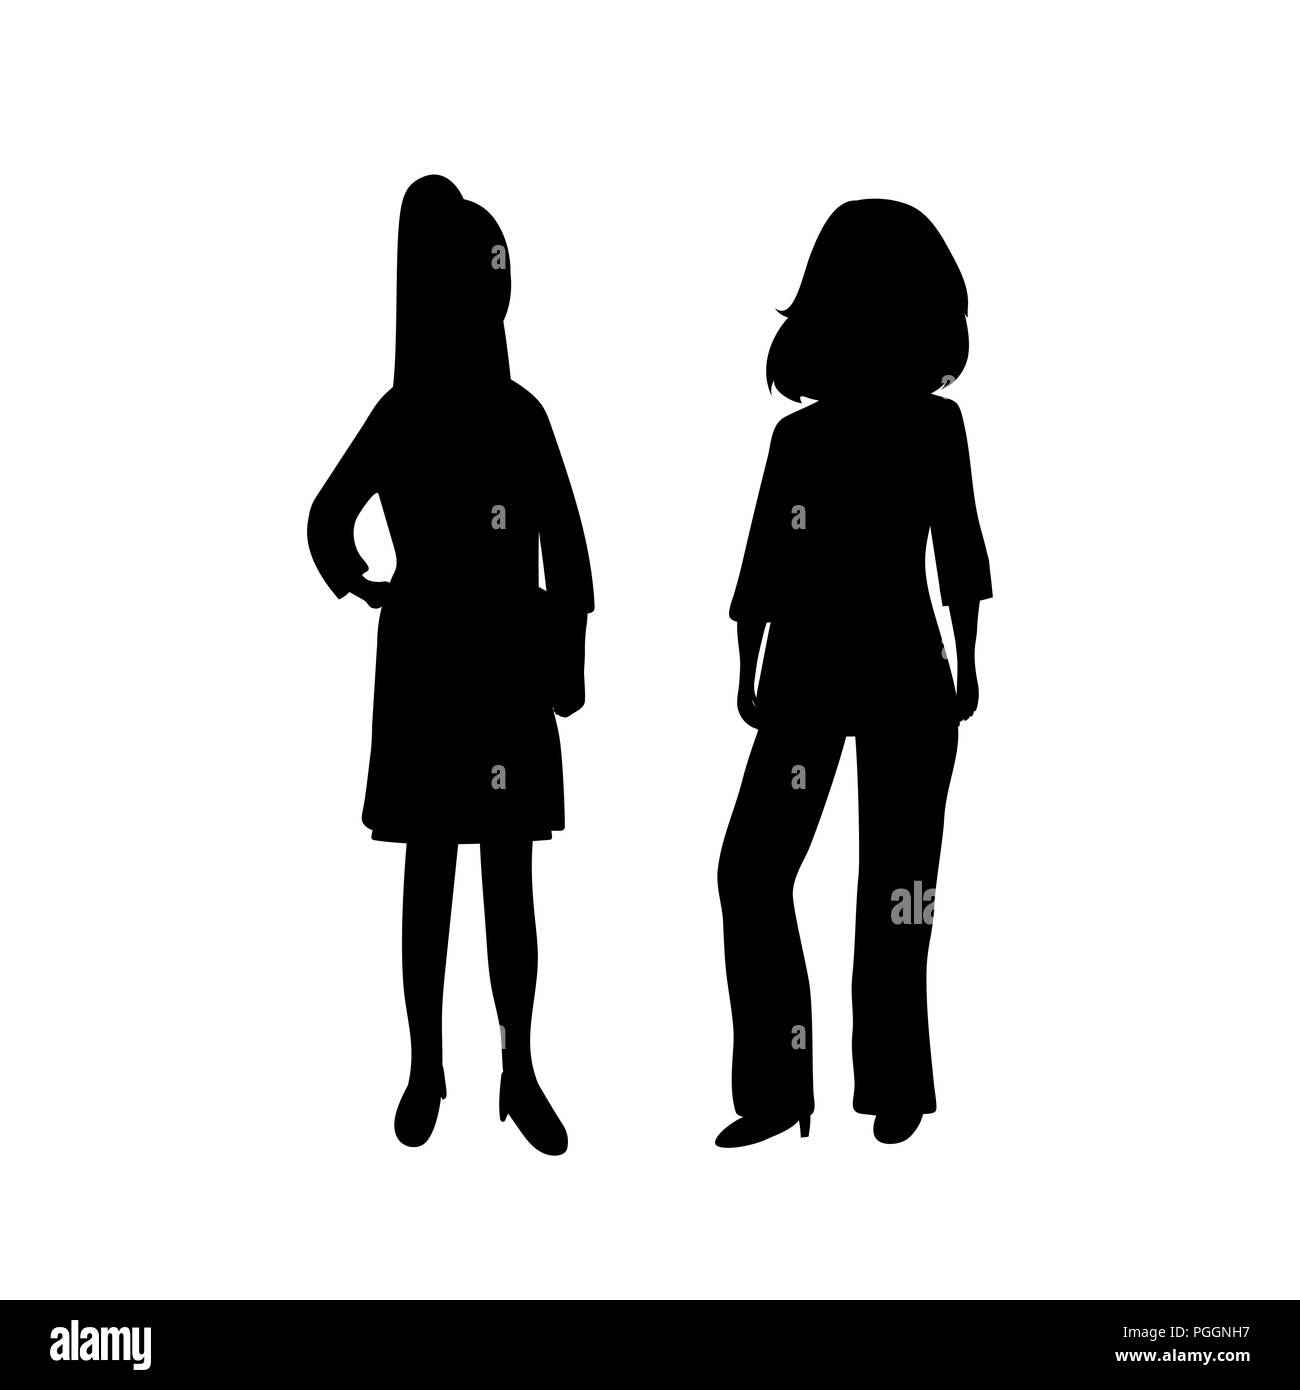 Female business woman silhouettes  Stock Vector